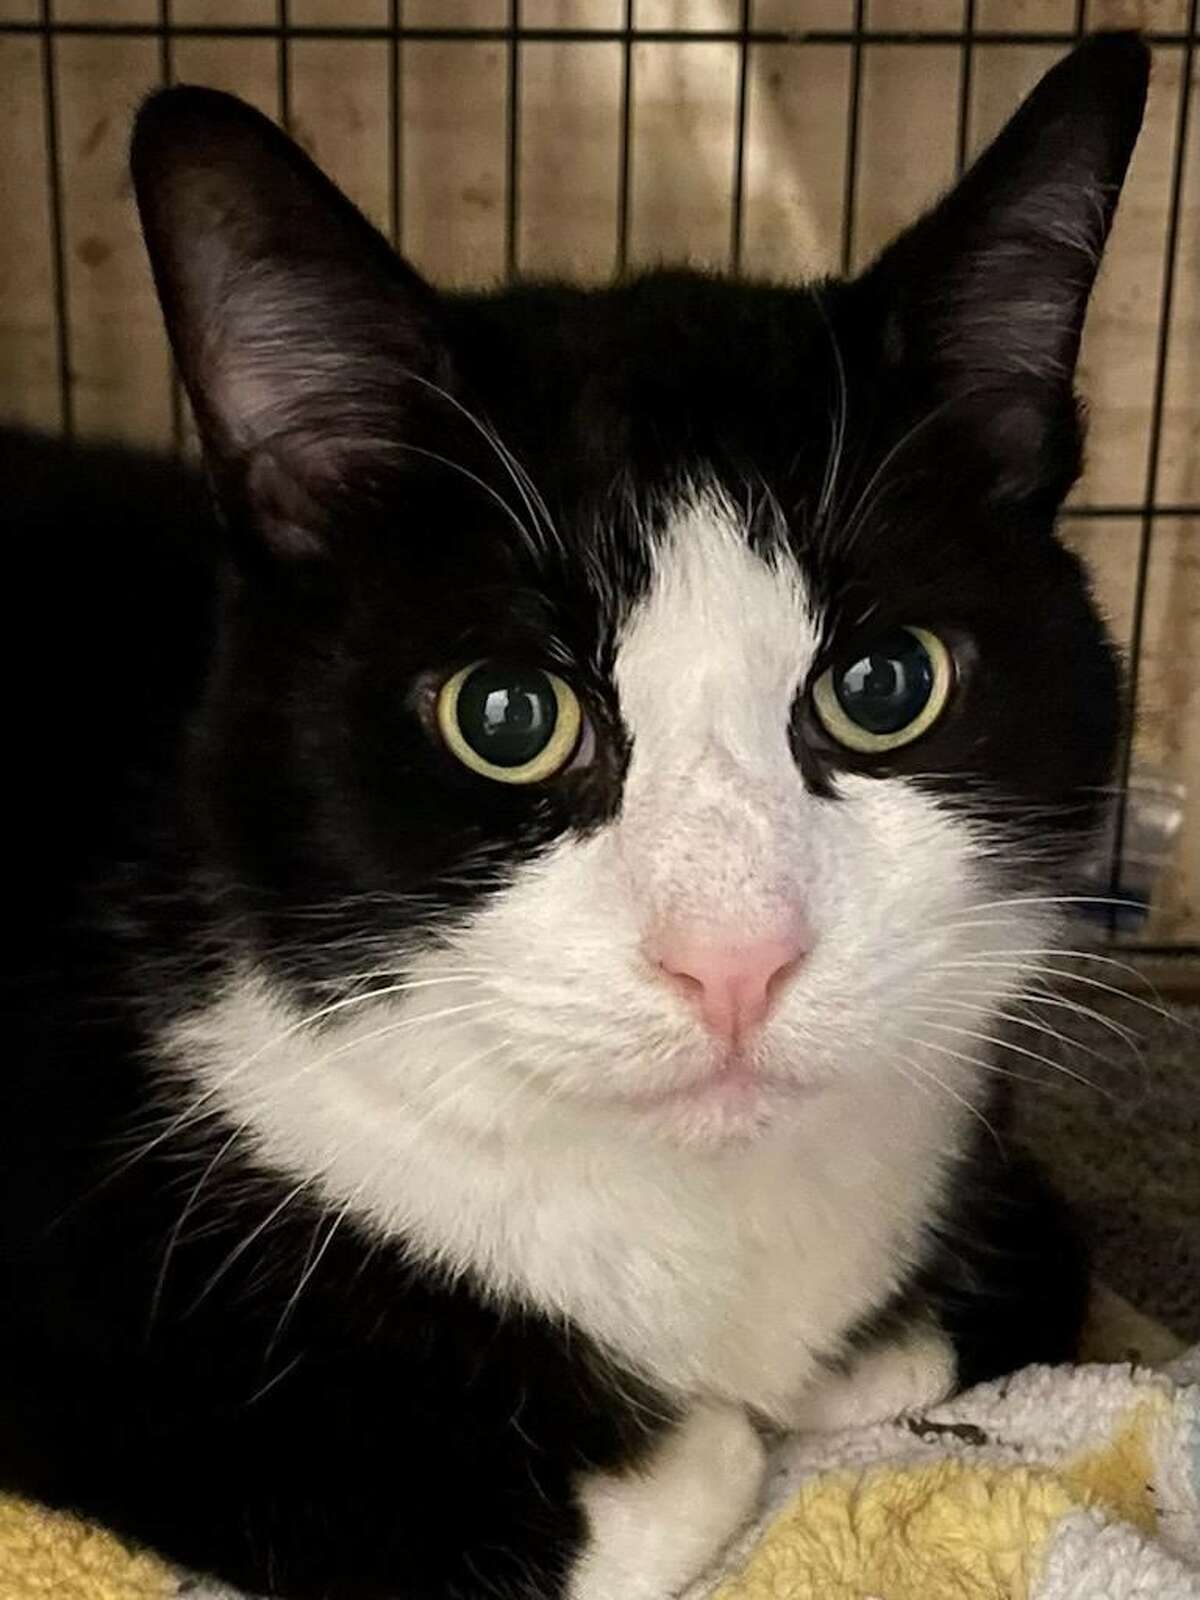 Abandoned by his owner and left to fend for himself, Socks the cat, originally from Poughkeepsie, is currently being housed with Wells Valley Cat Rescue in New Milford. Daubert's Cheesecakes is currently raffling a dozen cupcake size cheesecakes to raise money to help Socks' medical expenses.